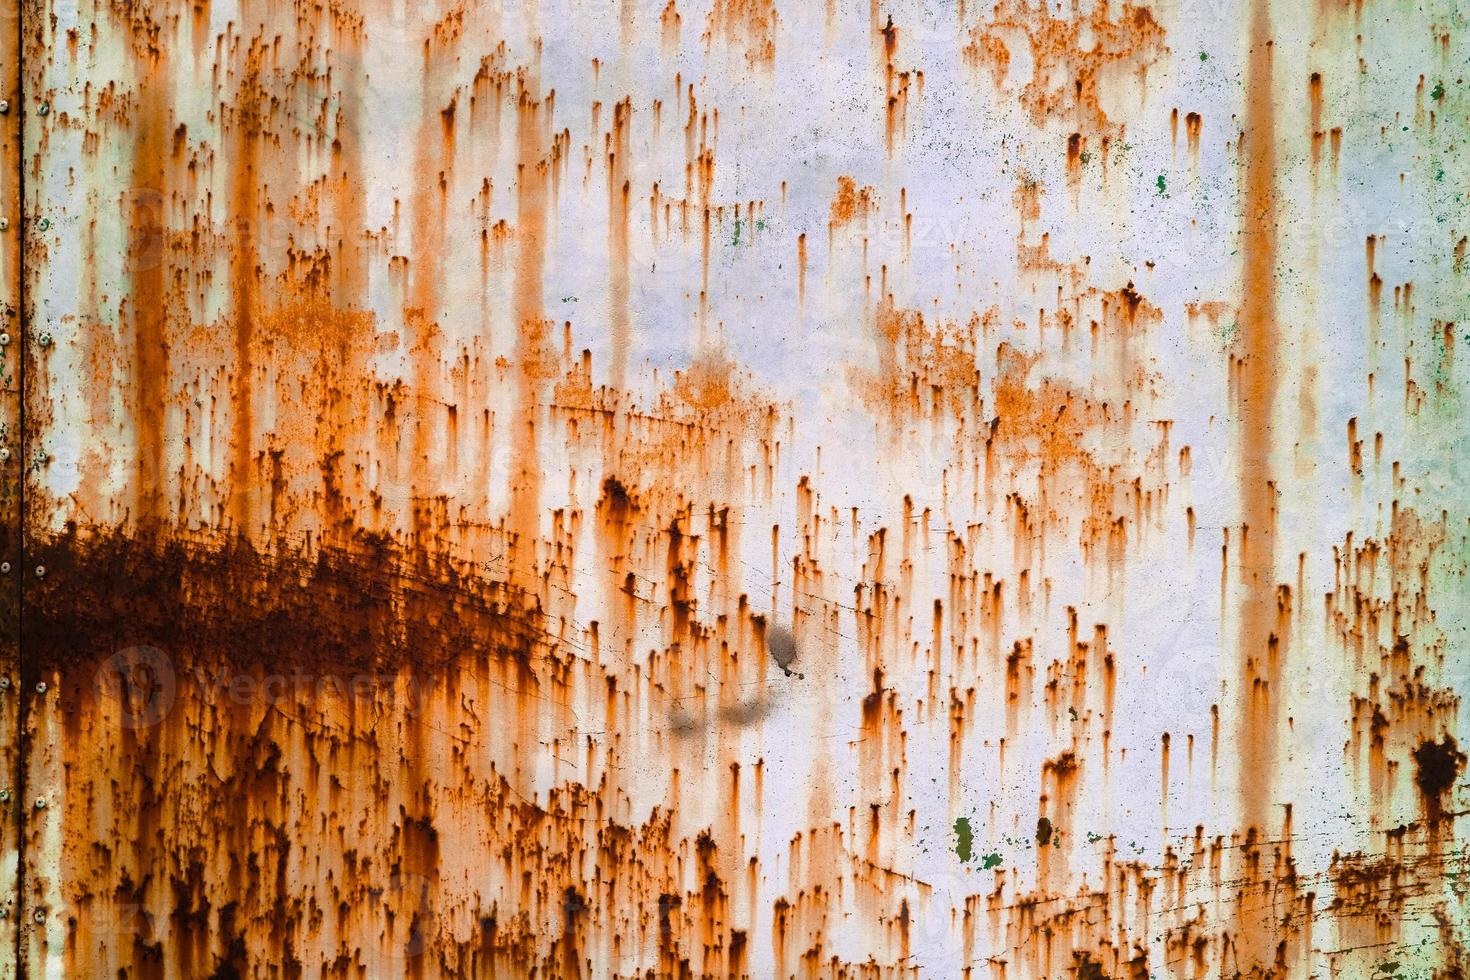 Rusted grunge metal, rust, oxidized steel texture. Industrial metal background texture. photo